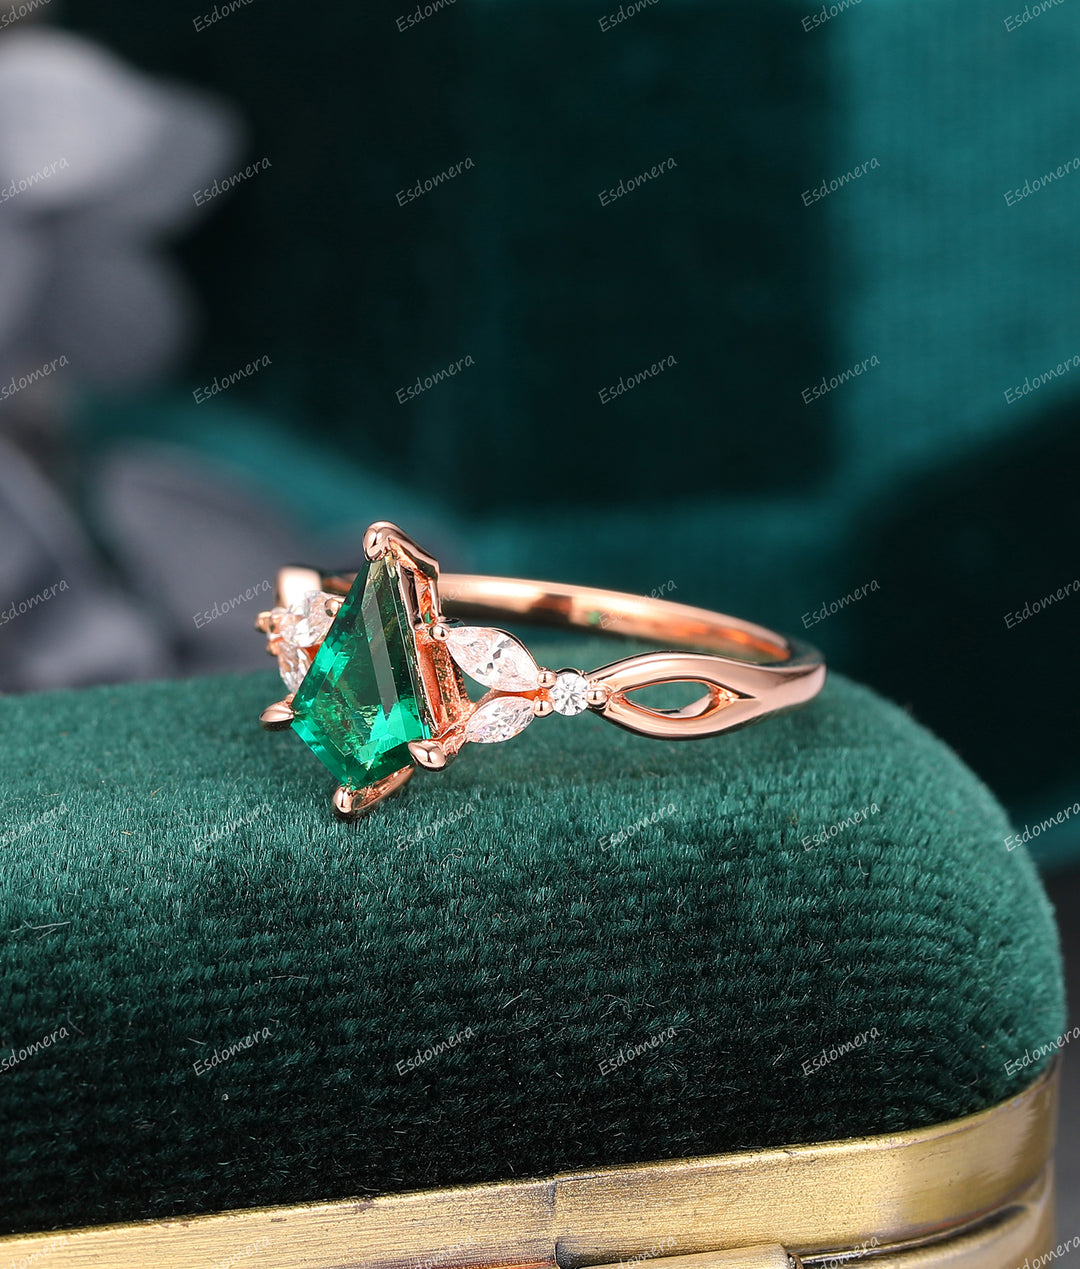 Kite Cut 1.35CT Green Emerald Engagement Ring, Cross Band Bridal Ring, 14K Rose Gold Statement Ring For Her